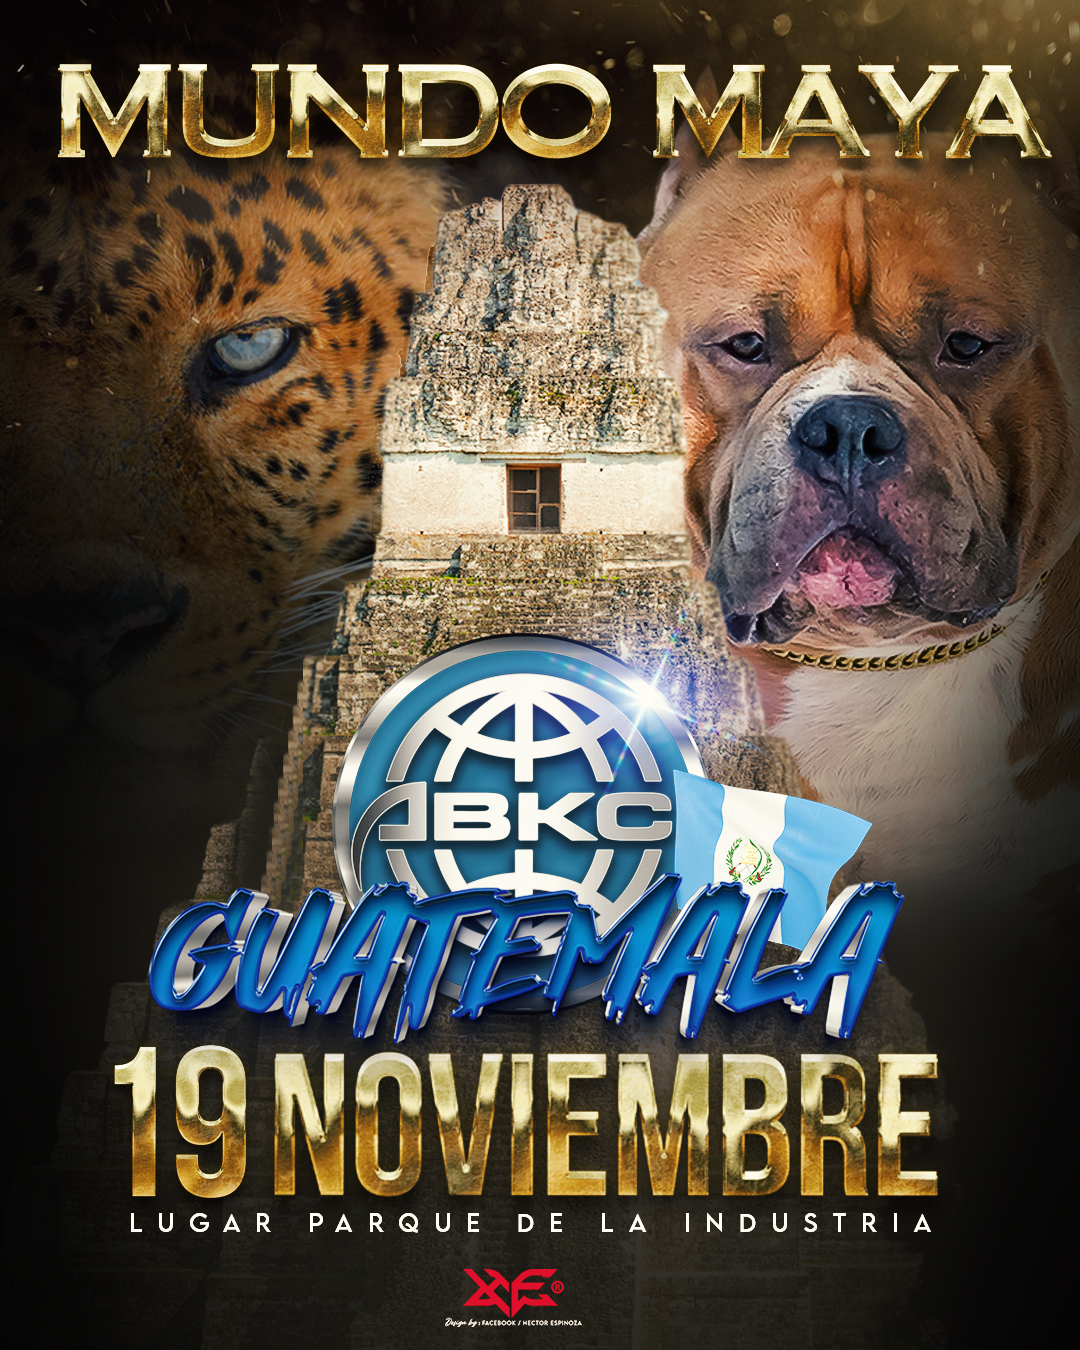 Events from November 11 – August 12 – Page 3 – THE AMERICAN BULLY